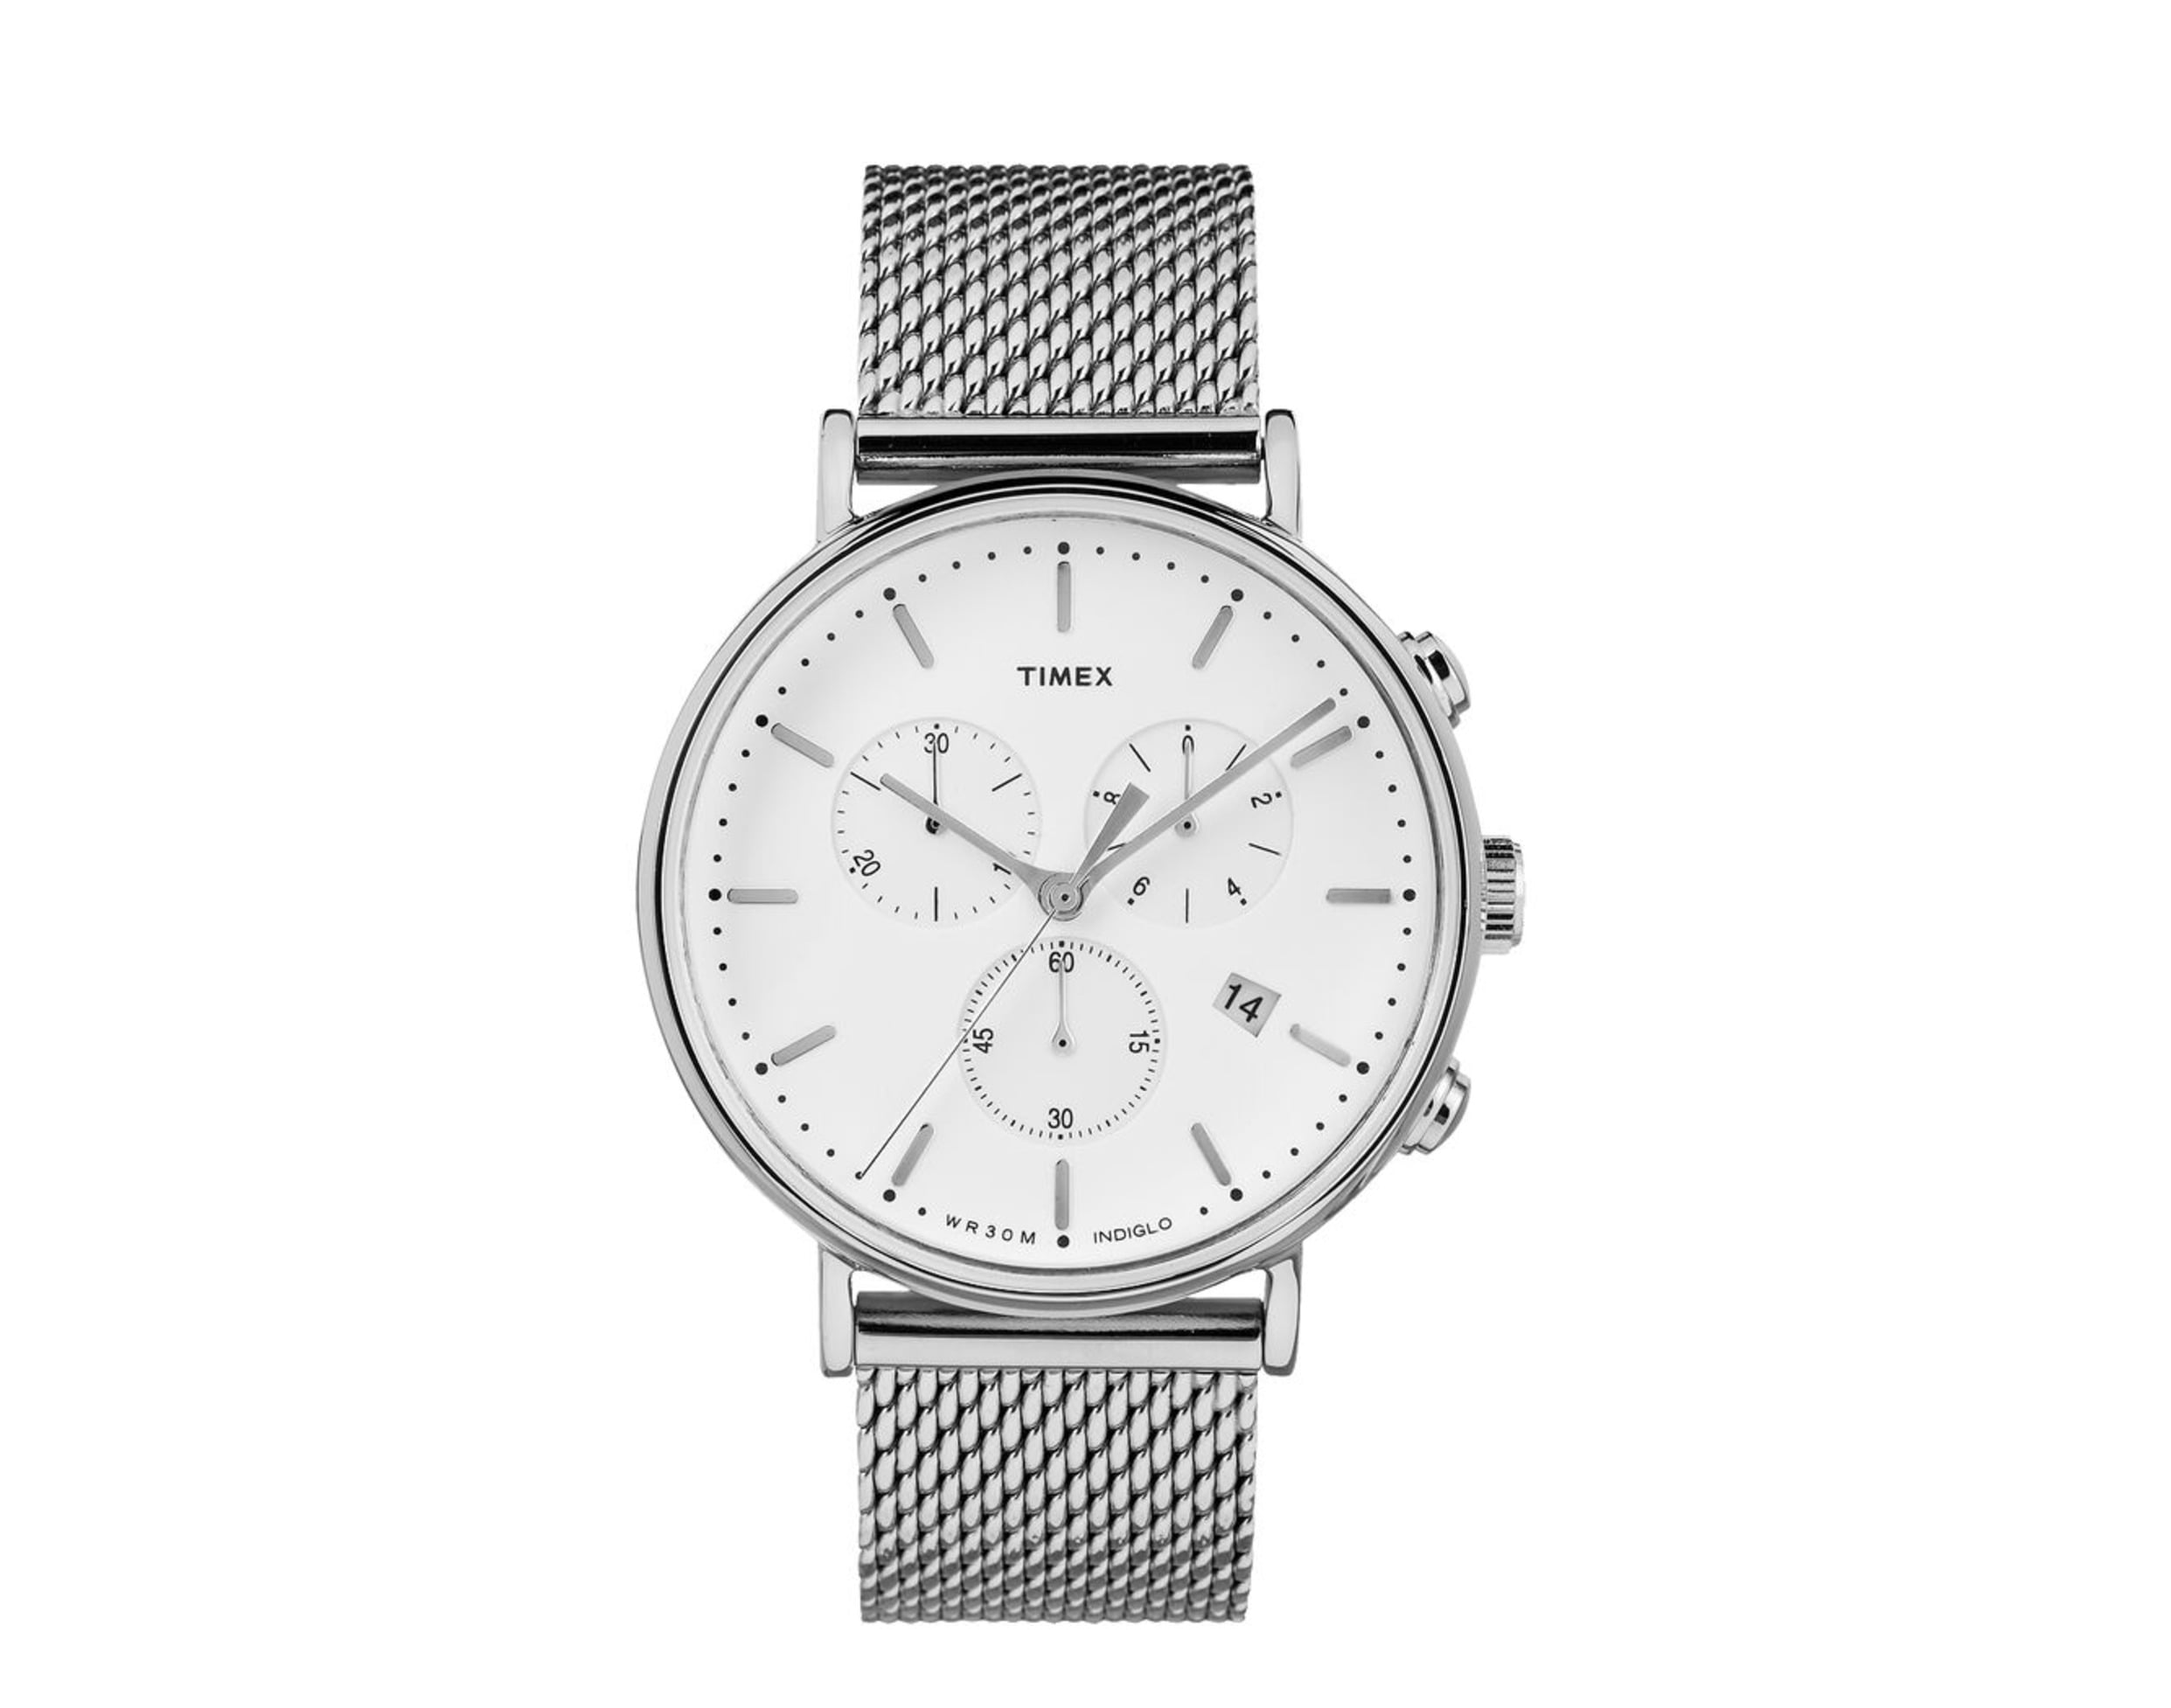 Timex Fairfield Chronograph 41mm Stainless Steel Mesh Band Watch ...